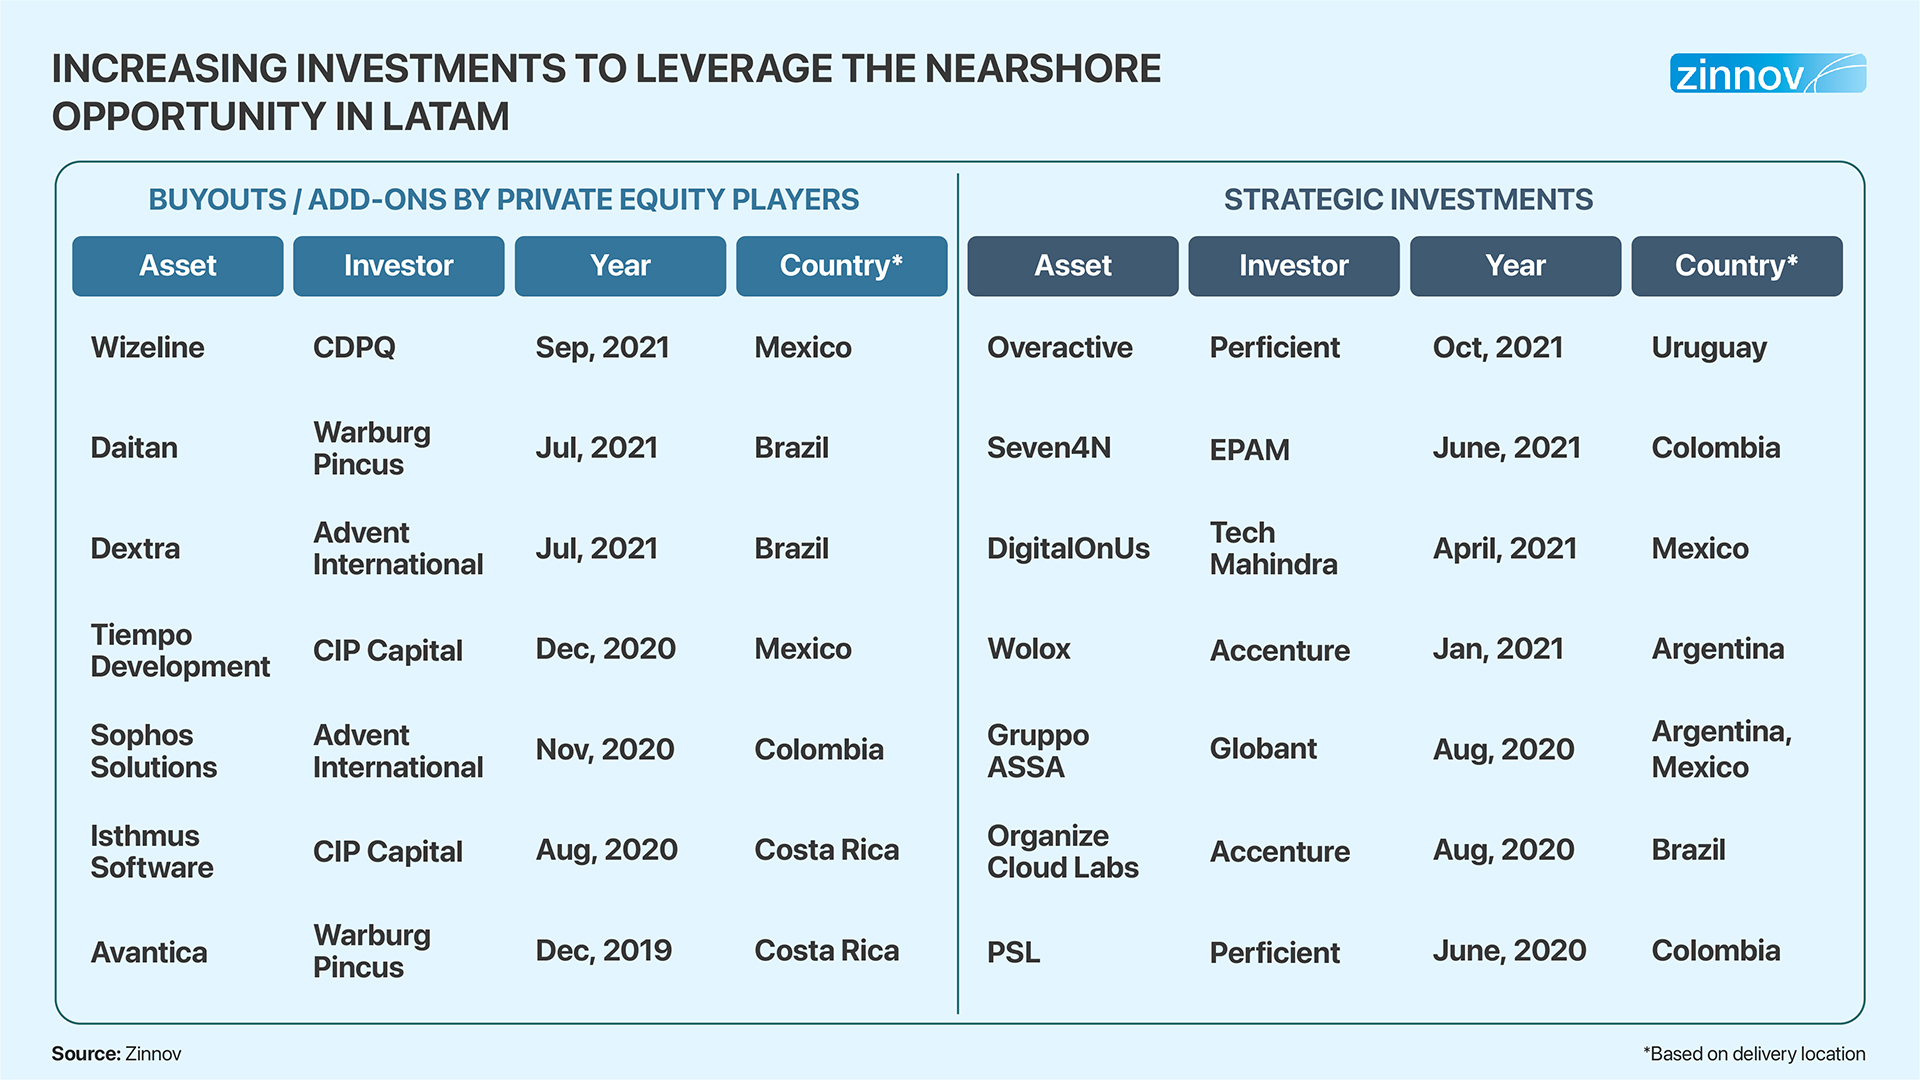 Increasing investment to leverage the nearshore opportunity in Latam